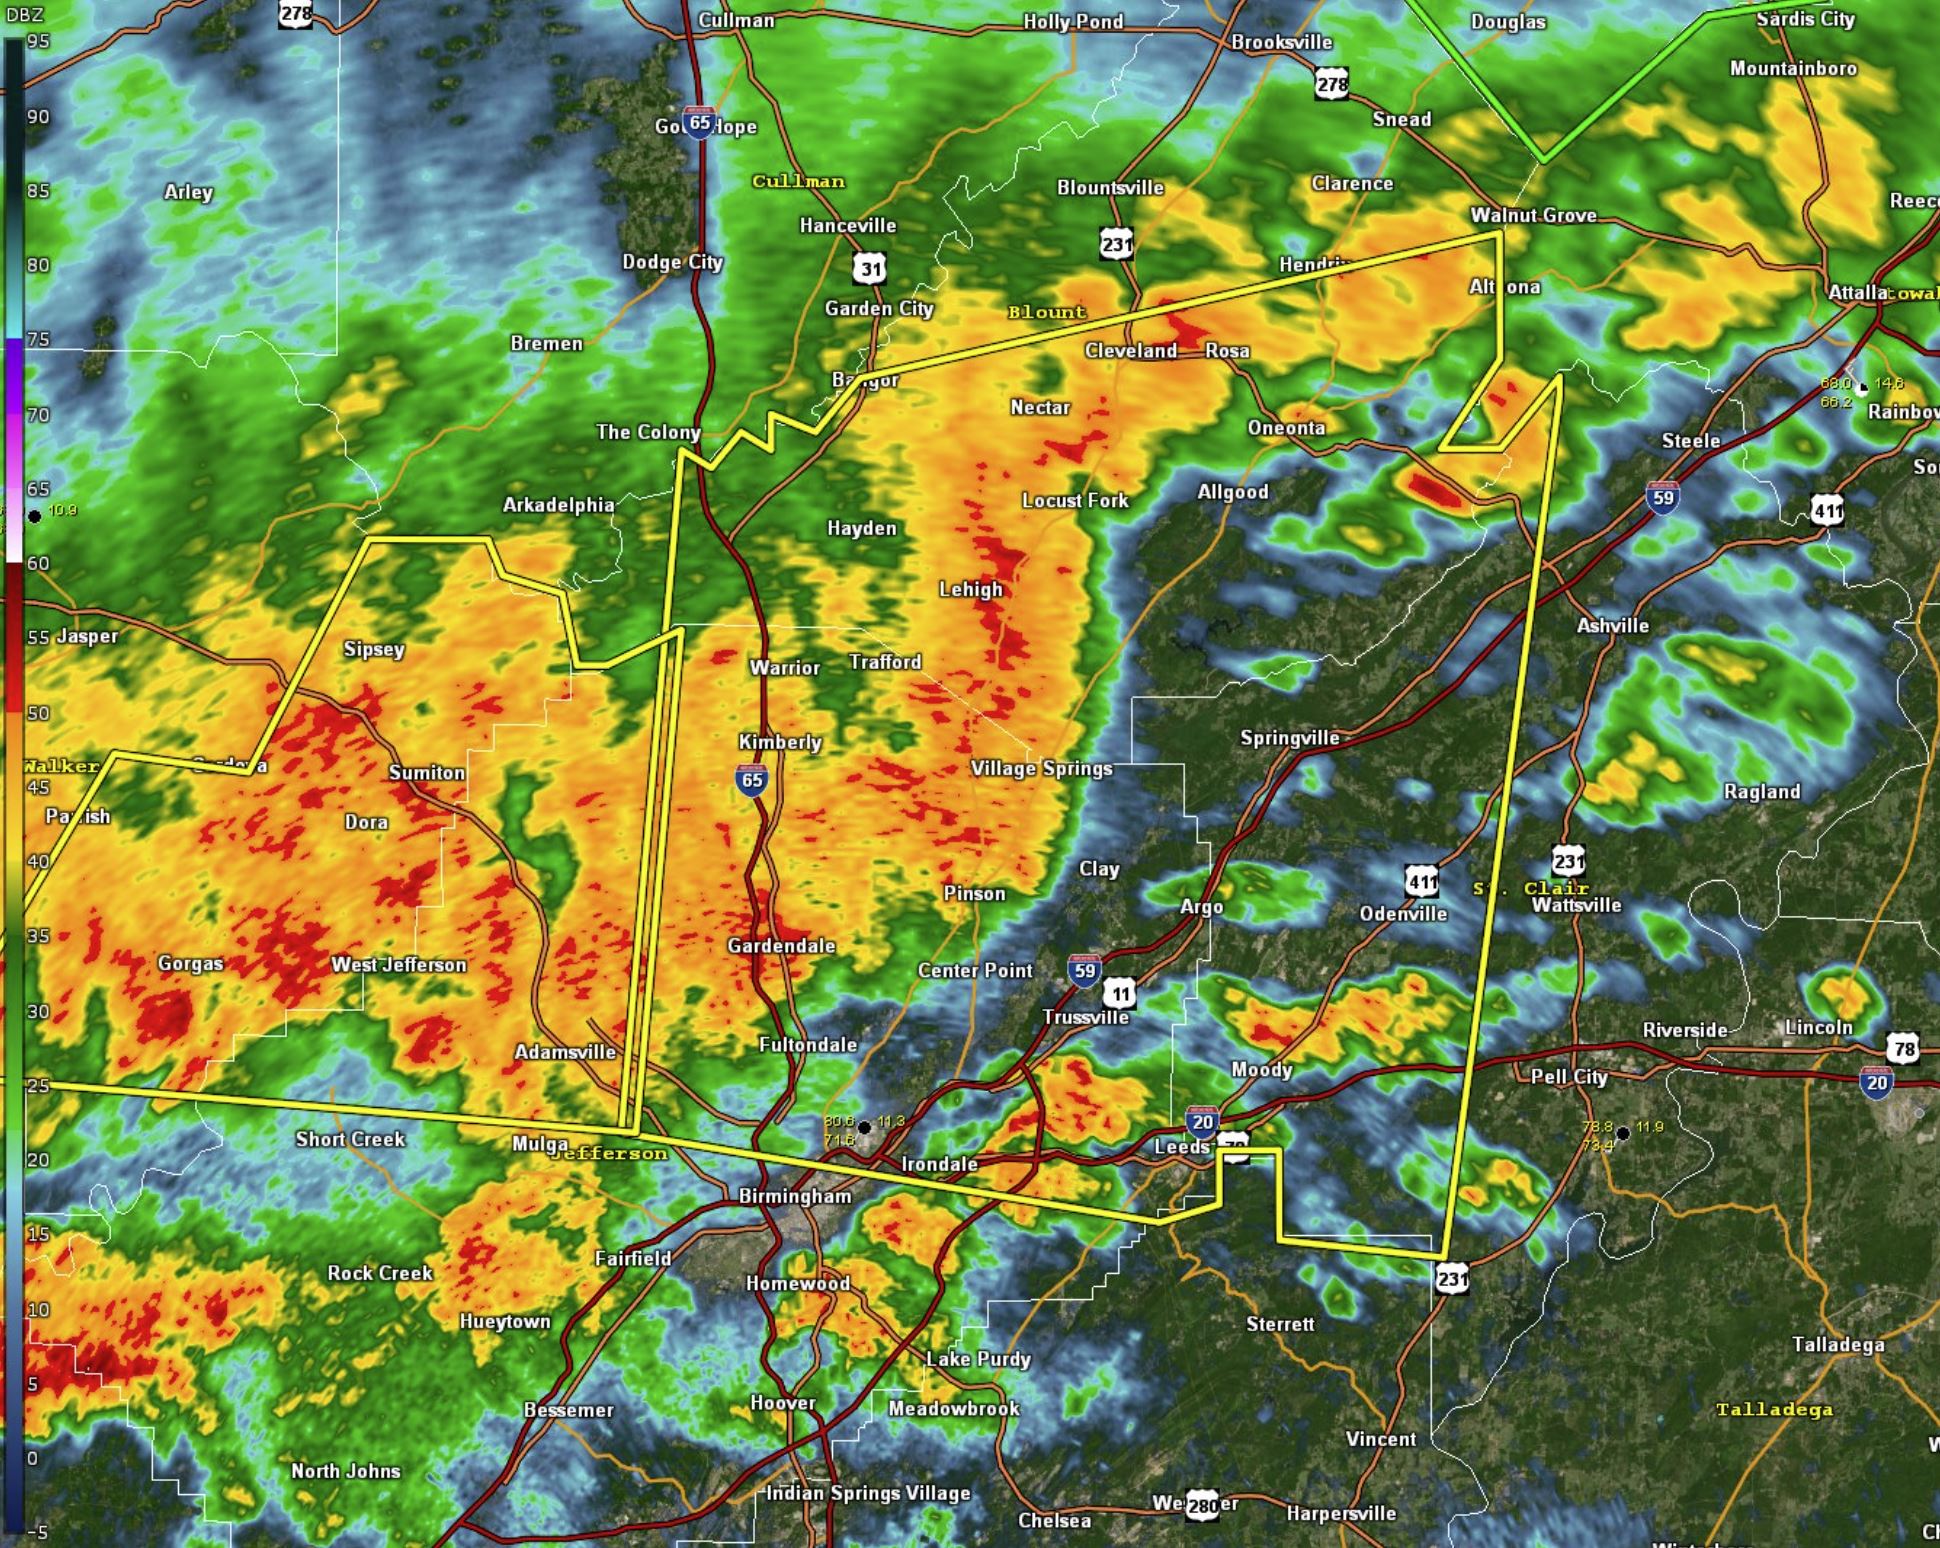 Severe Thunderstorm issued for Blount, Jefferson, St. Clair Counties